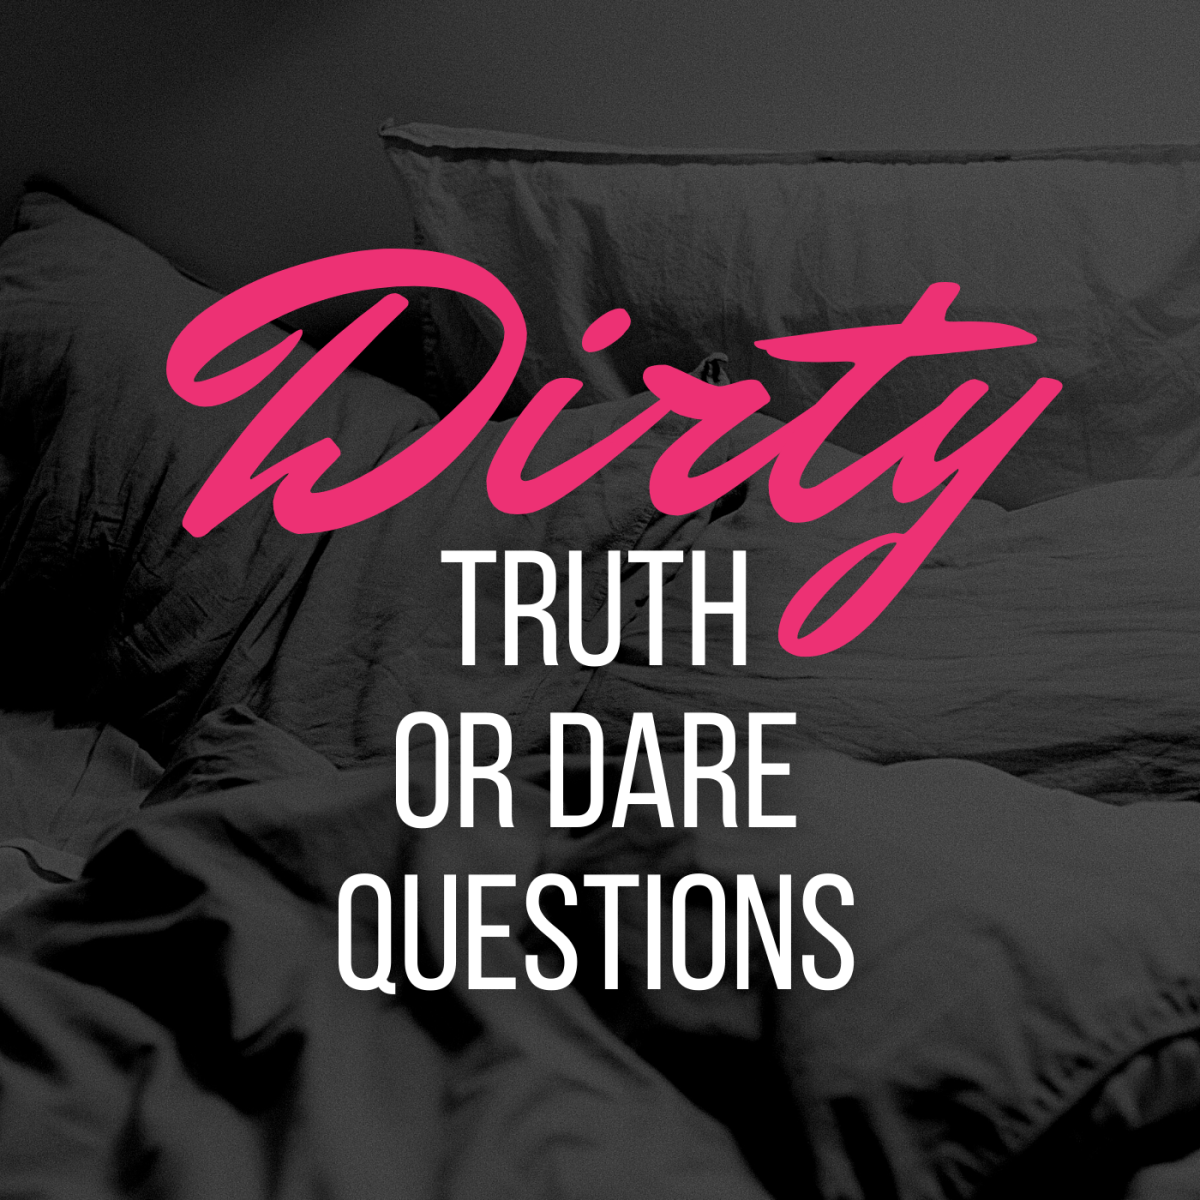 audrey galvin recommends Dirty Dares Over Snapchat